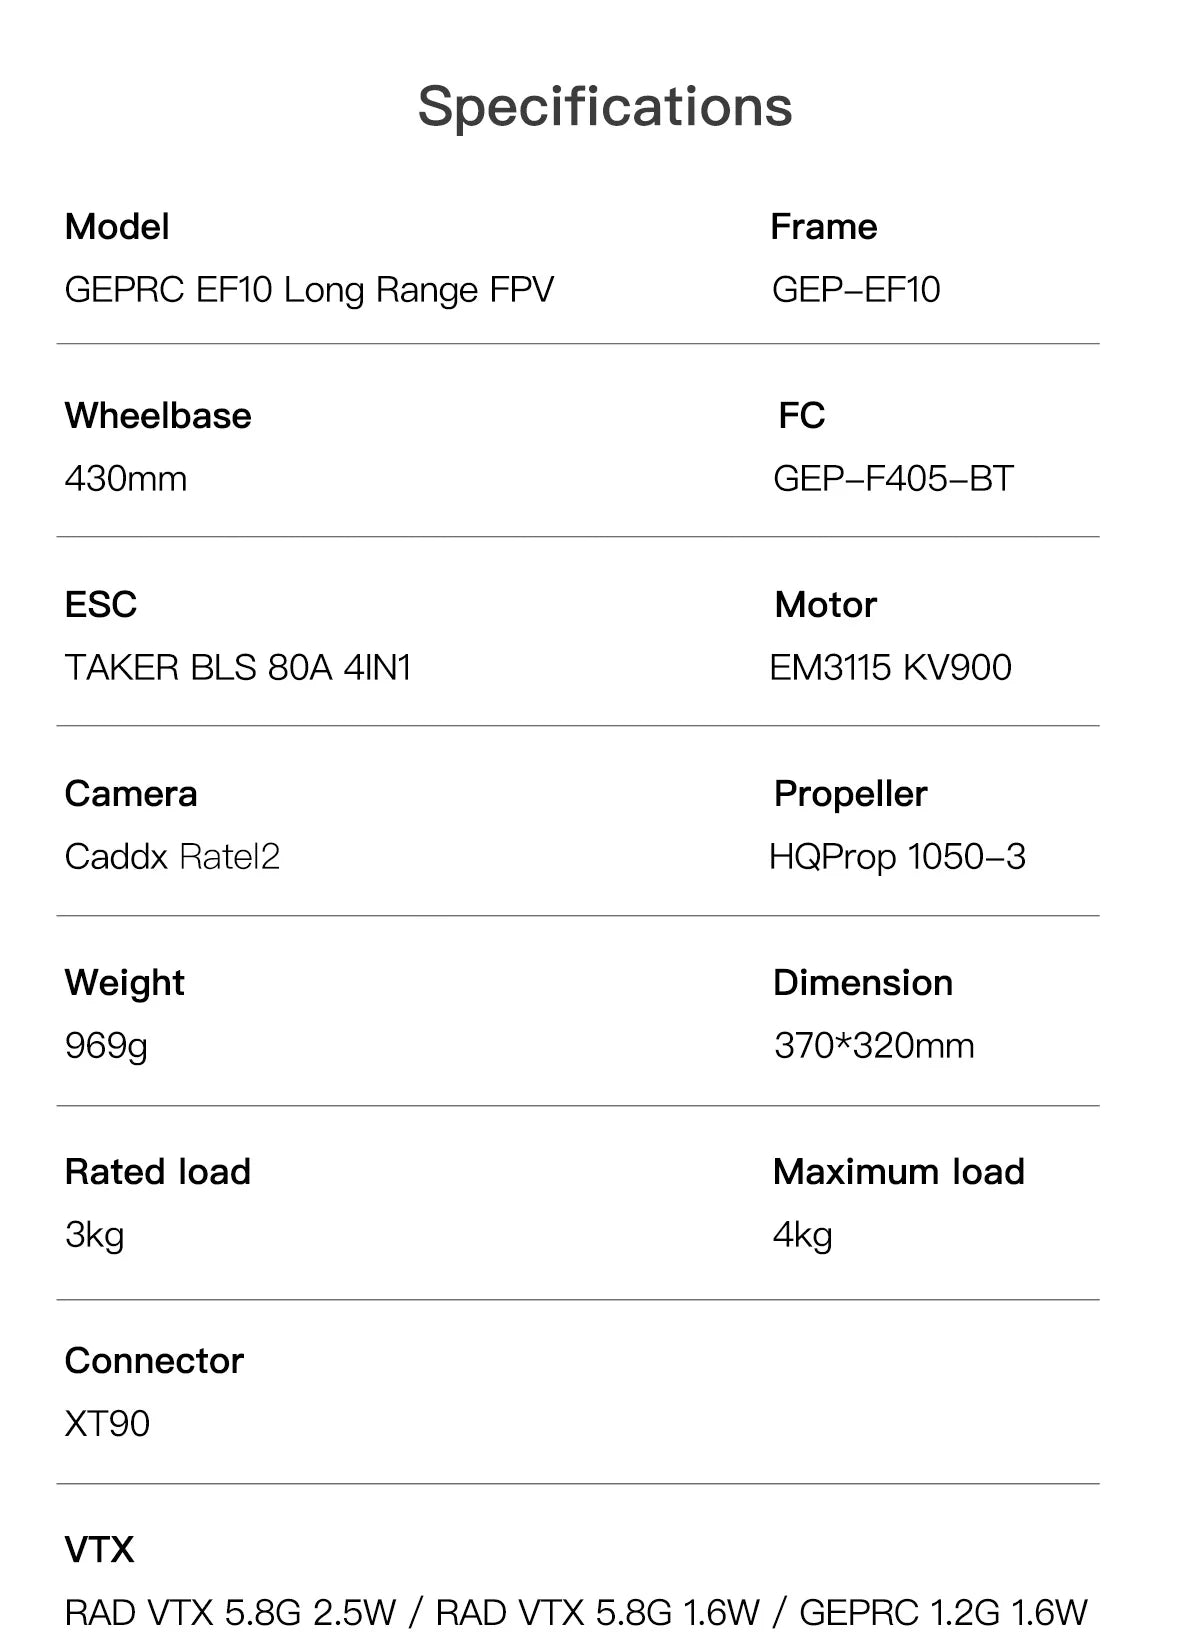 GEPRC EF10 5.8G 2.5W Long Range FPV, HQProp 1050-3 Weight Dimension 969g 370*32Omm Rated